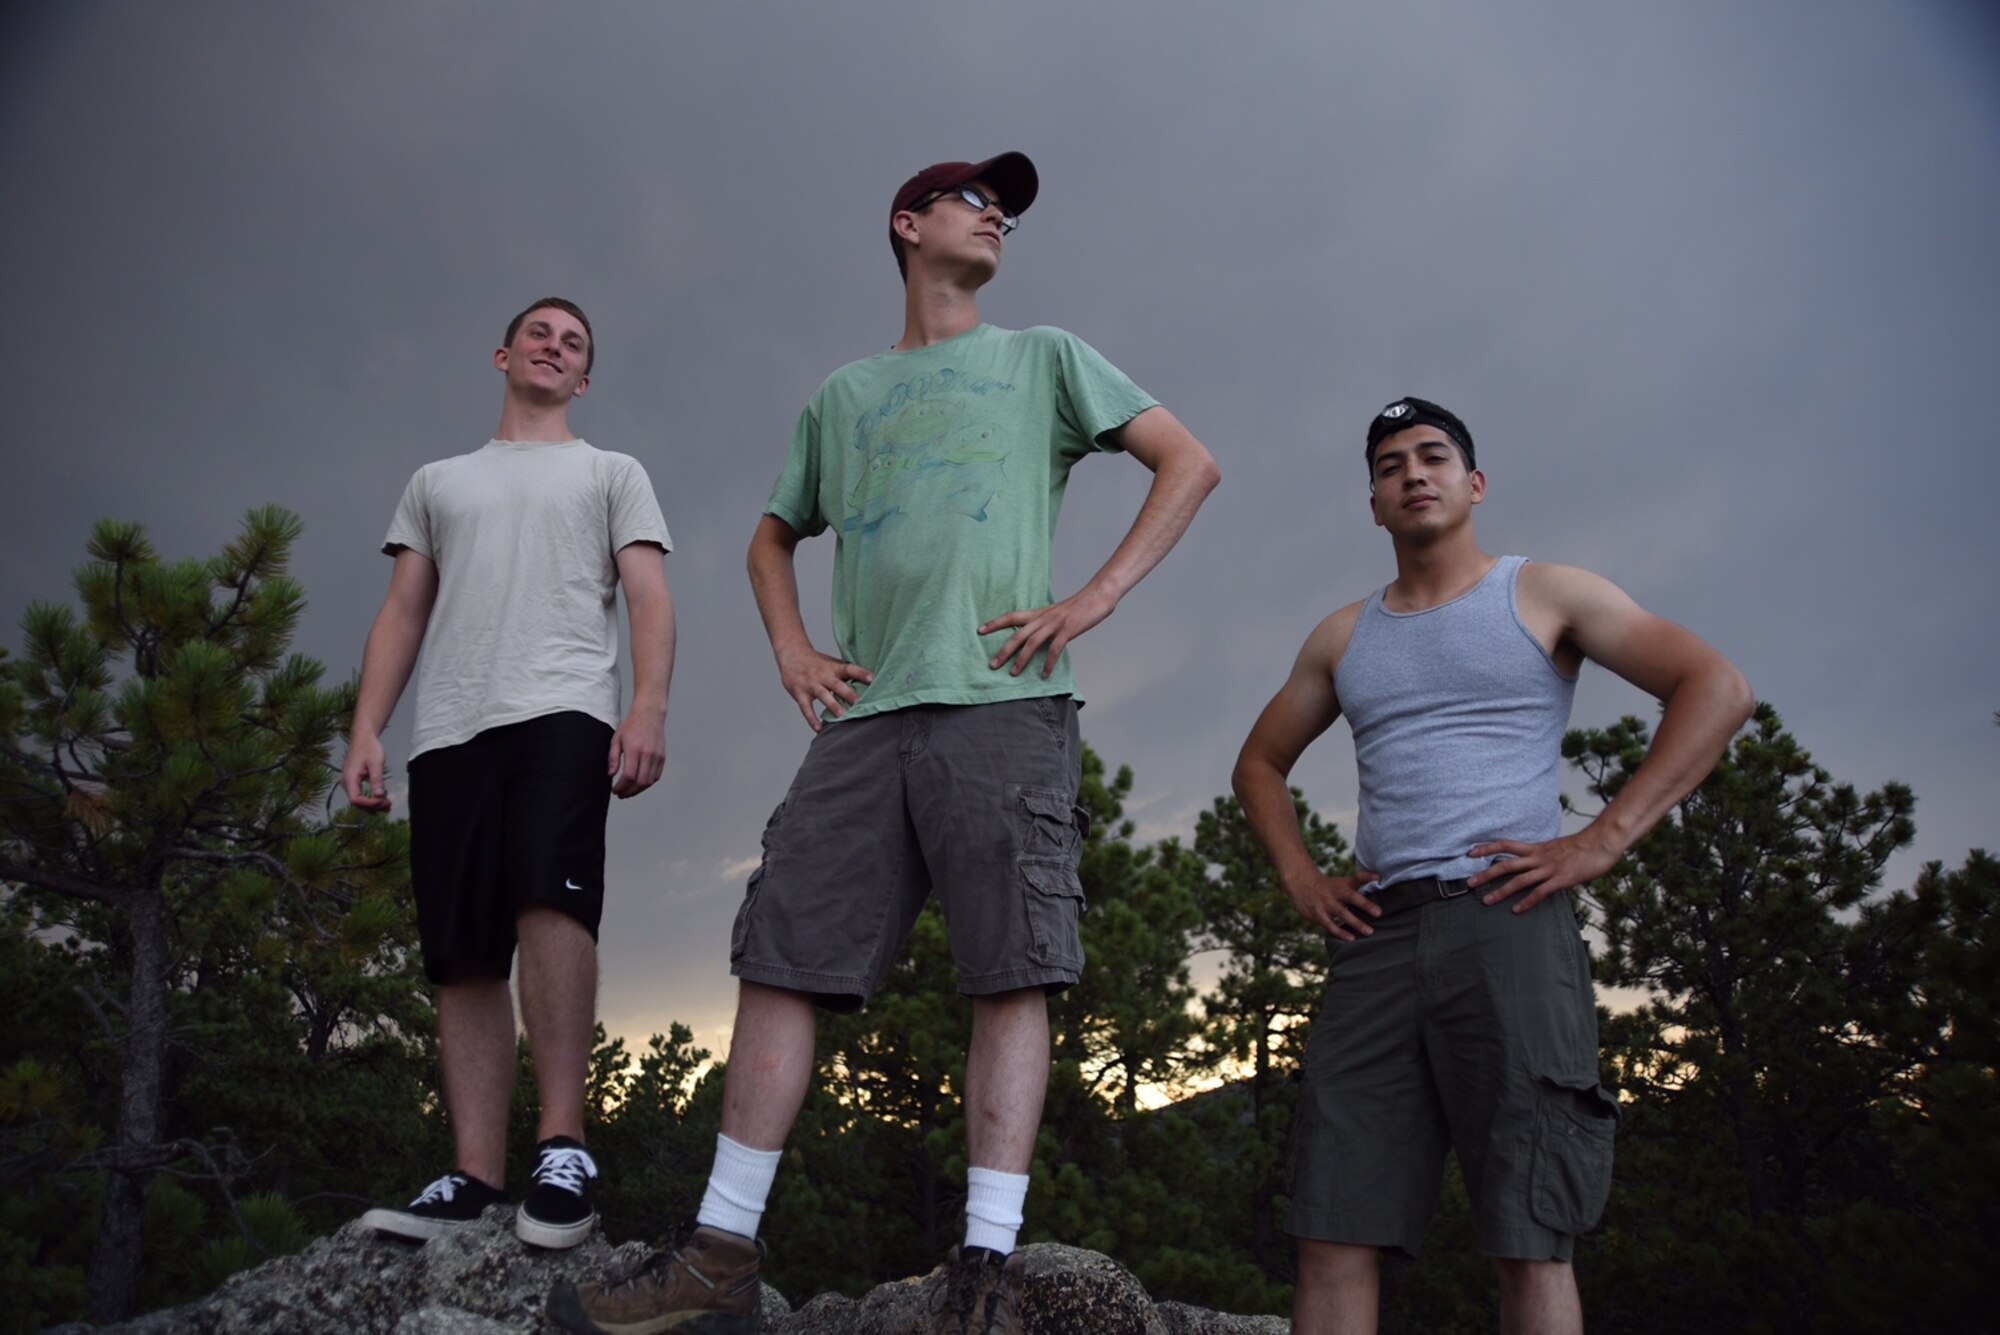 Airman 1st Class Matt Hinson, 28th Comptroller Squadron financial customer service technician (left), Staff Sgt. William Johnson, 28th CPTS unit deployment manager (center), and A1C Fabian Miranda-Corpuz right, 28th CPTS budget analyst (right), pose for a photo after conquering the climb to the top of a rock formation at Custer State Park, S.D., July 24, 2015. Hiking is a way for Hinson and his co-workers to relax and bond outside of their work environment. (U.S. Air Force photo by Airman 1st Class James L. Miller/Released)